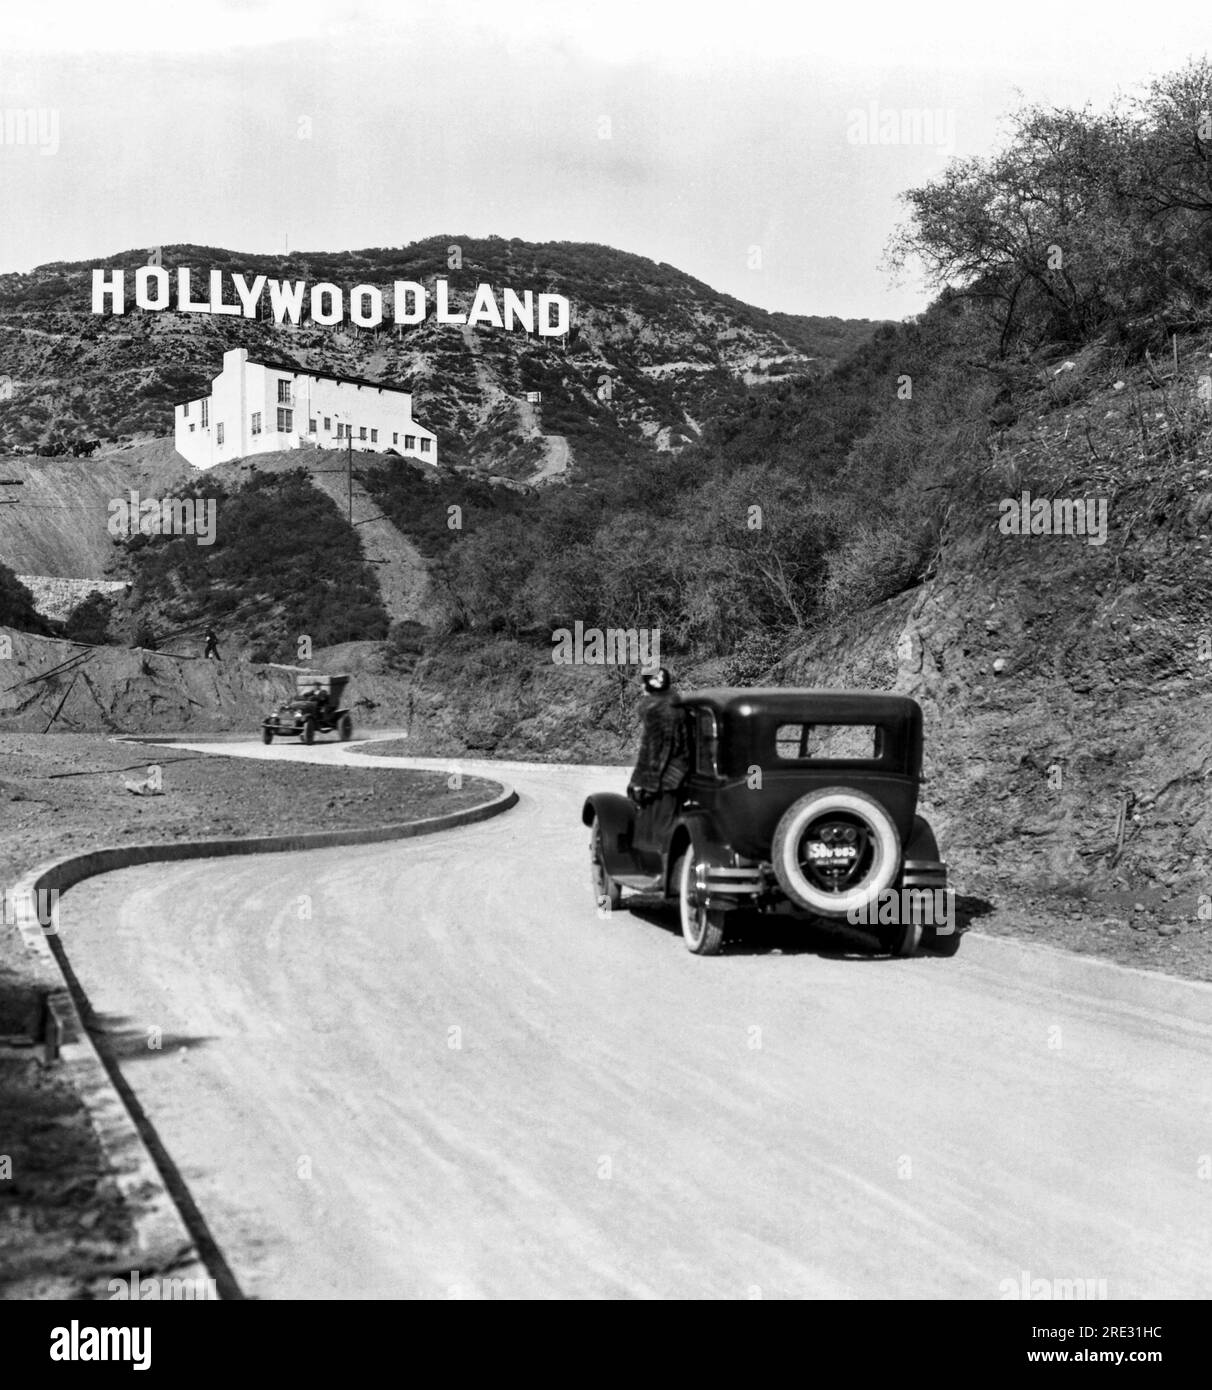 Hollywood, Los Angeles:  c. 1924 A sign advertises the opening of the Hollywoodland housing development in the hills on Mulholland Drive overlooking Los Angeles. The white building below the sign is the Kanst Art Gallery, which opened on April 1, 1924 Stock Photo